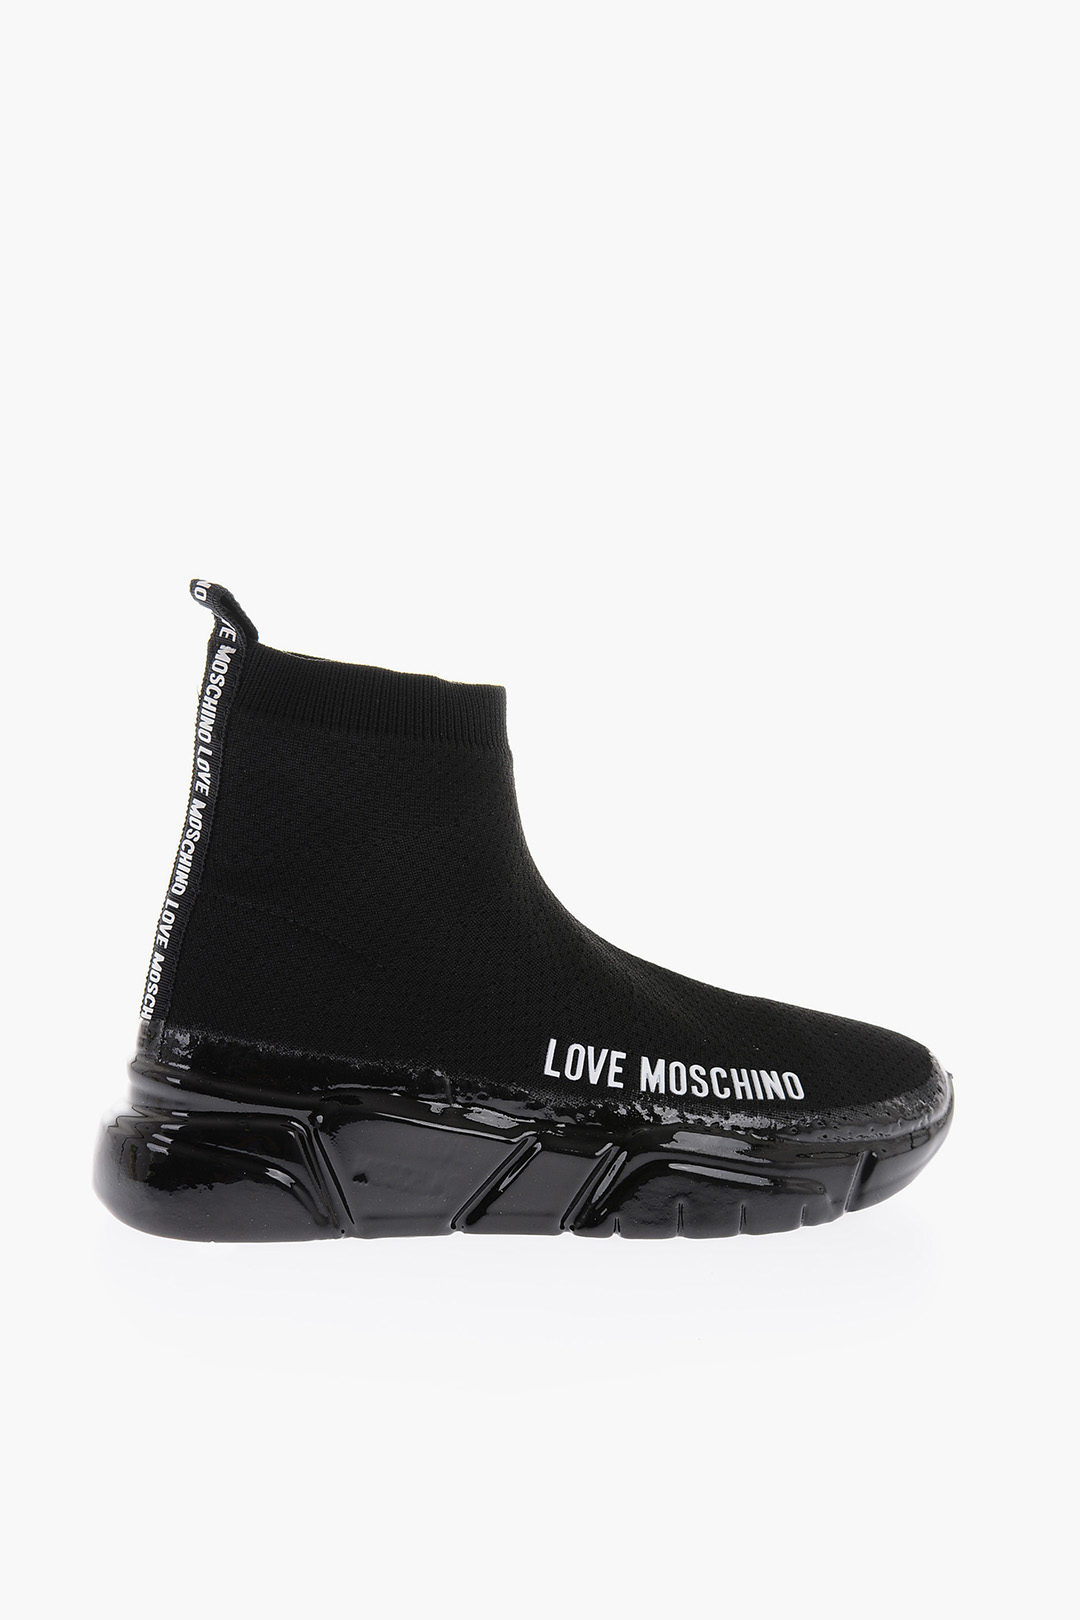 Moschino Perforated Fabric RUNNING35 High-Top Sock Sneakers with ...